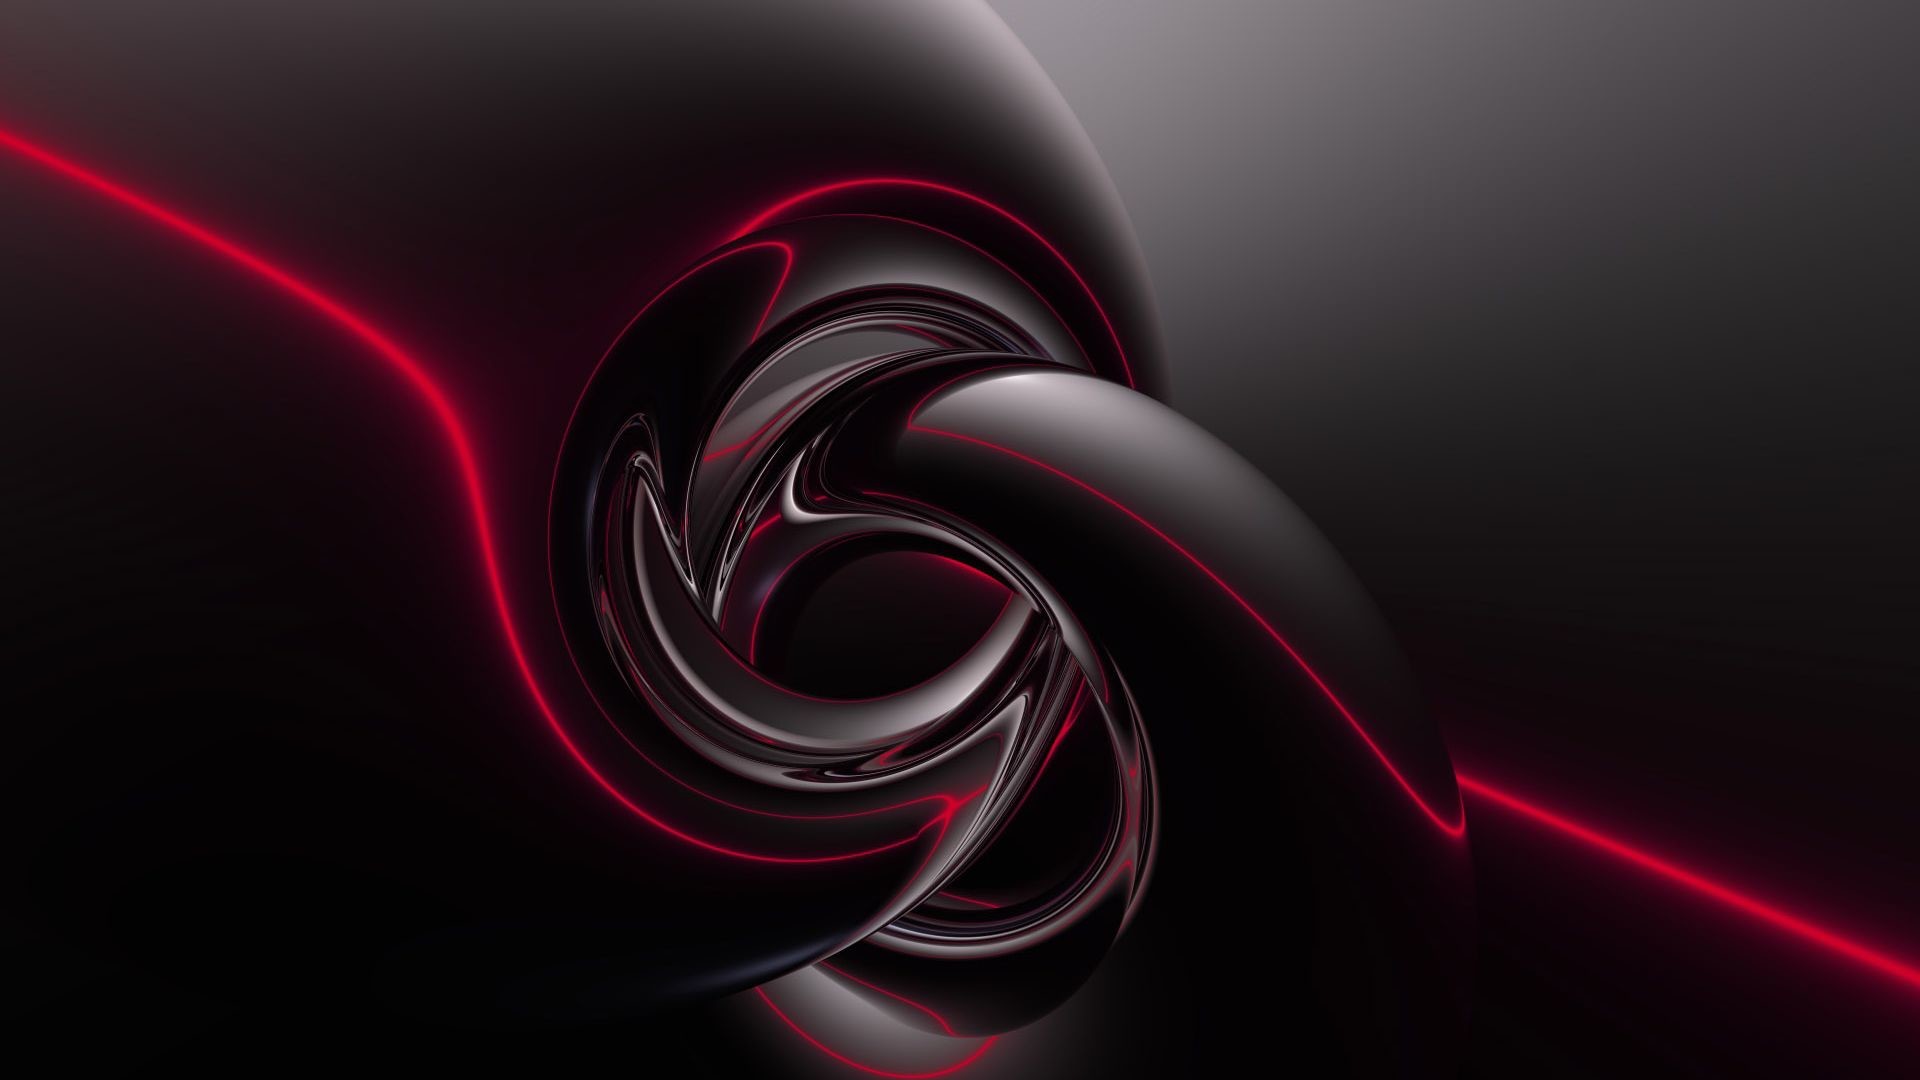 1920x1080 Abstract Red and Black 3D Wallpapar